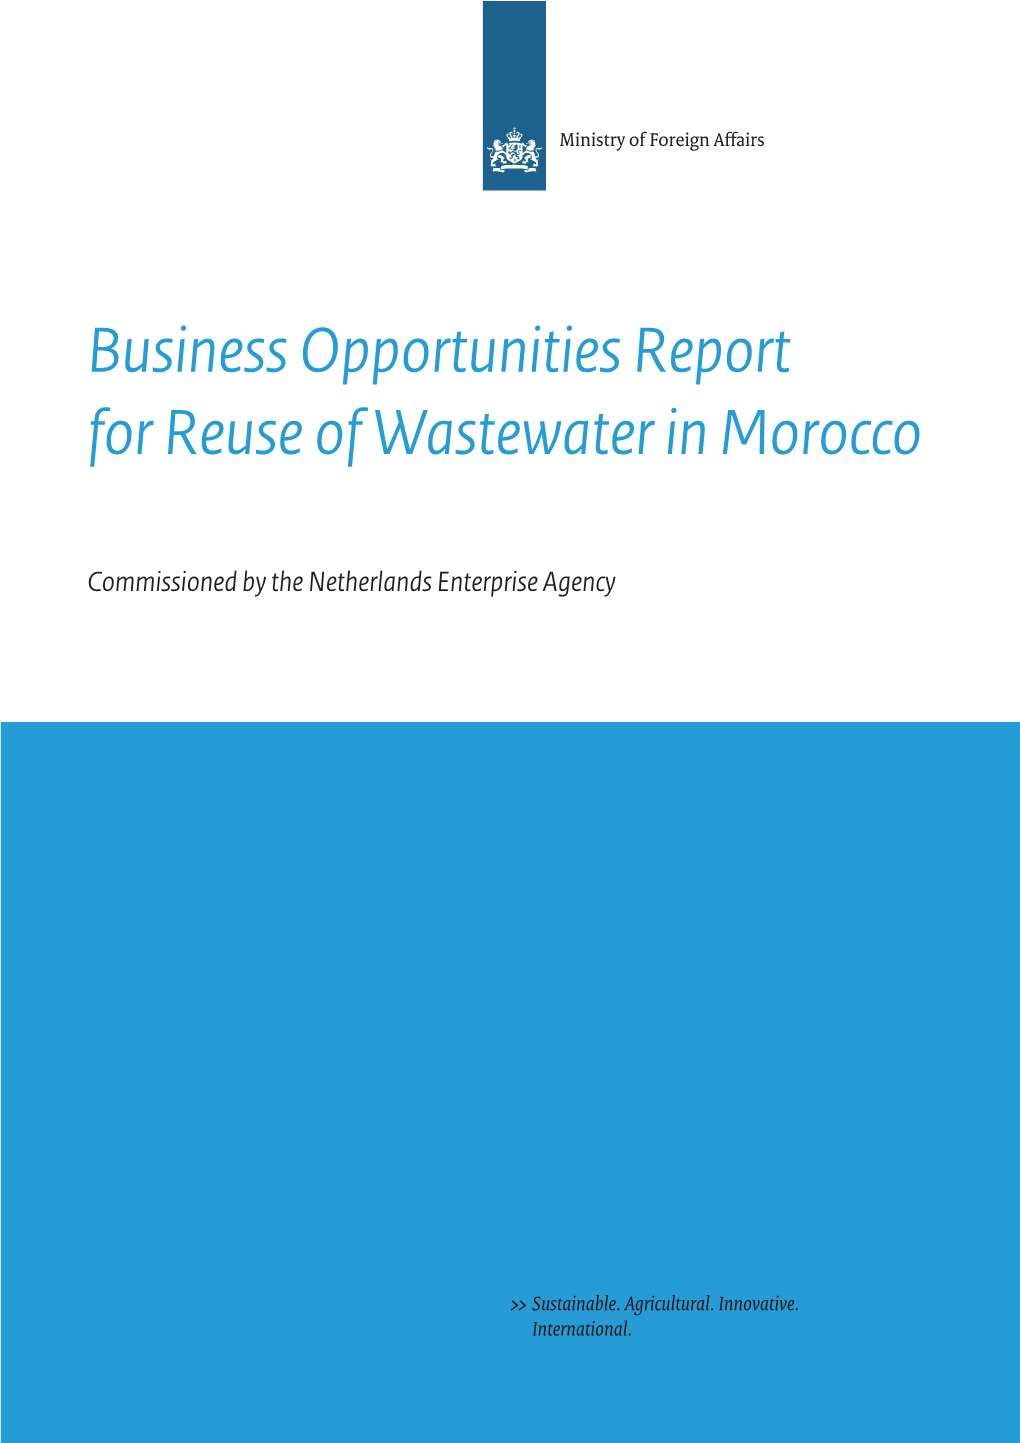 Business Opportunities Report for Reuse of Wastewater in Morocco